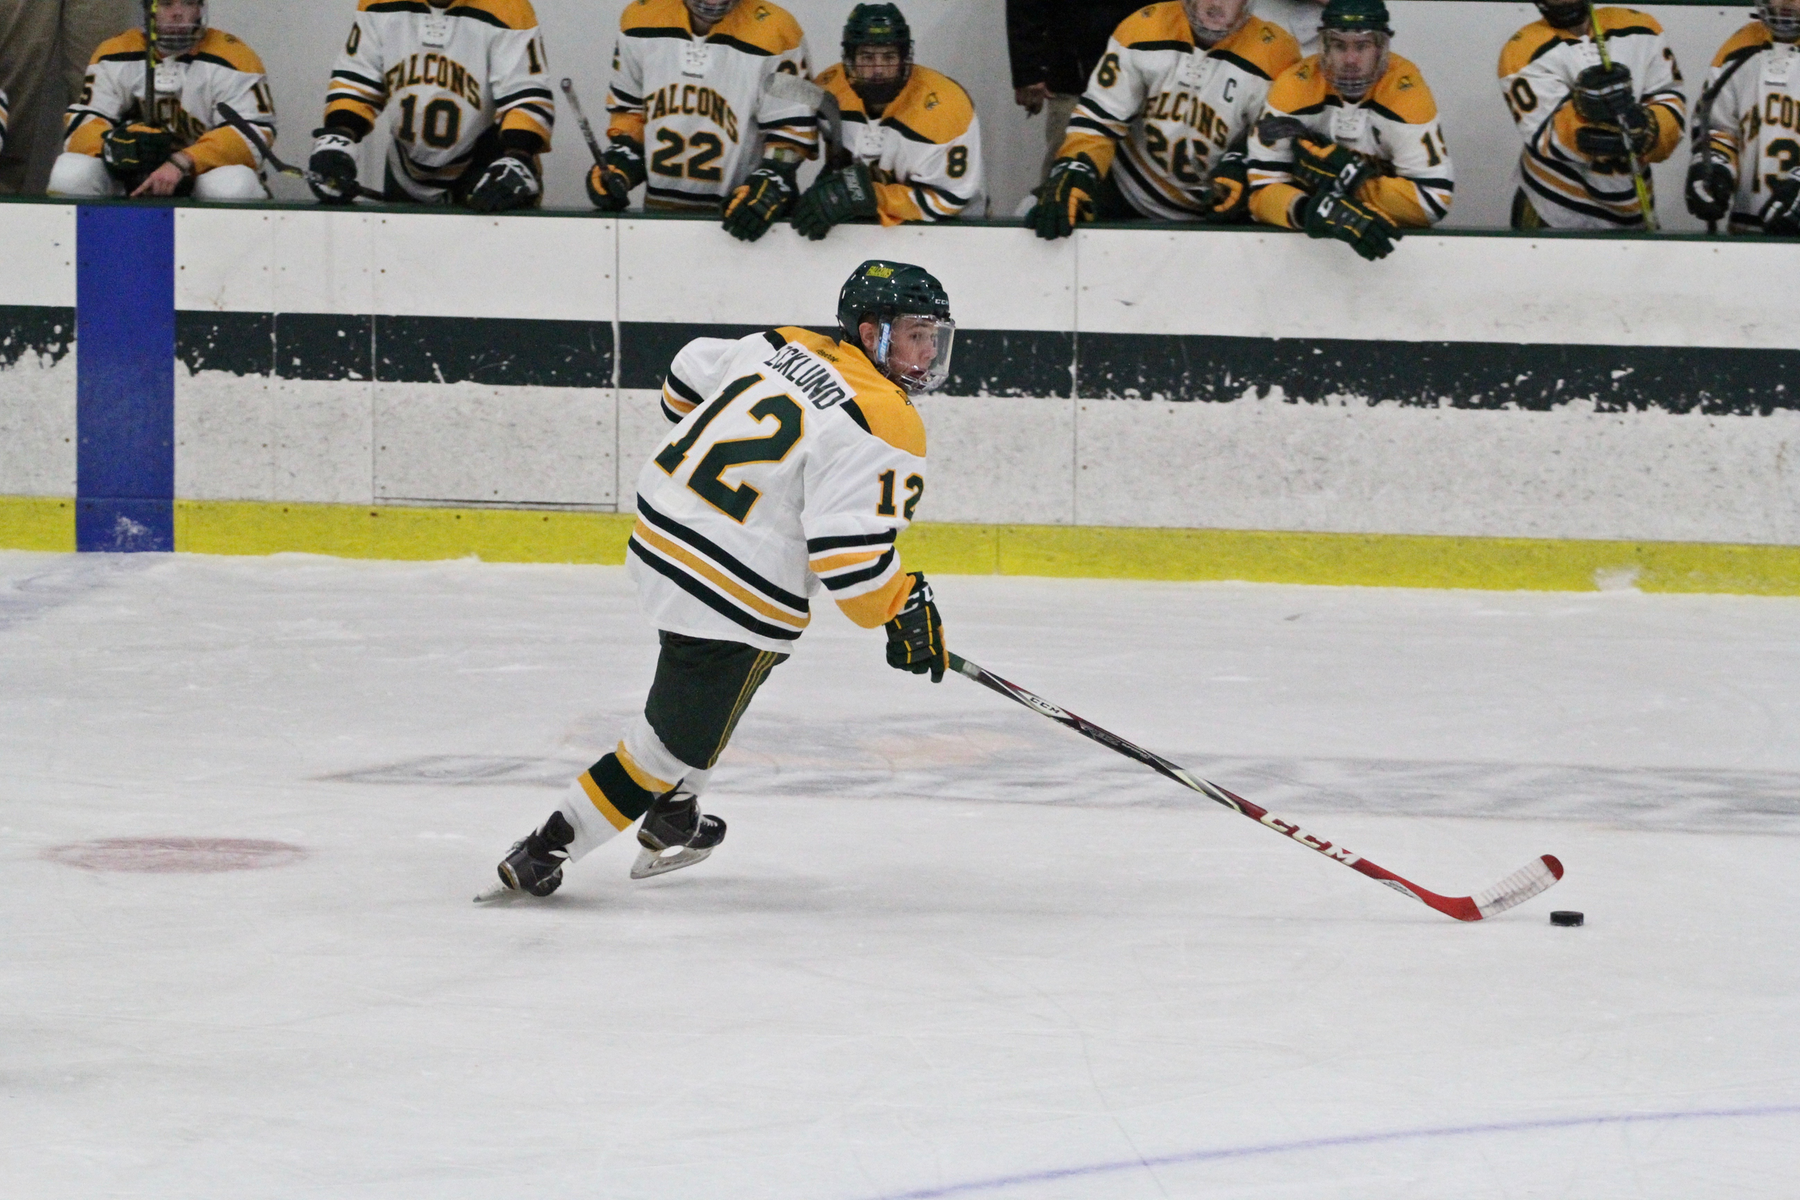 Fitchburg State Falls to Worcester State, 4-2